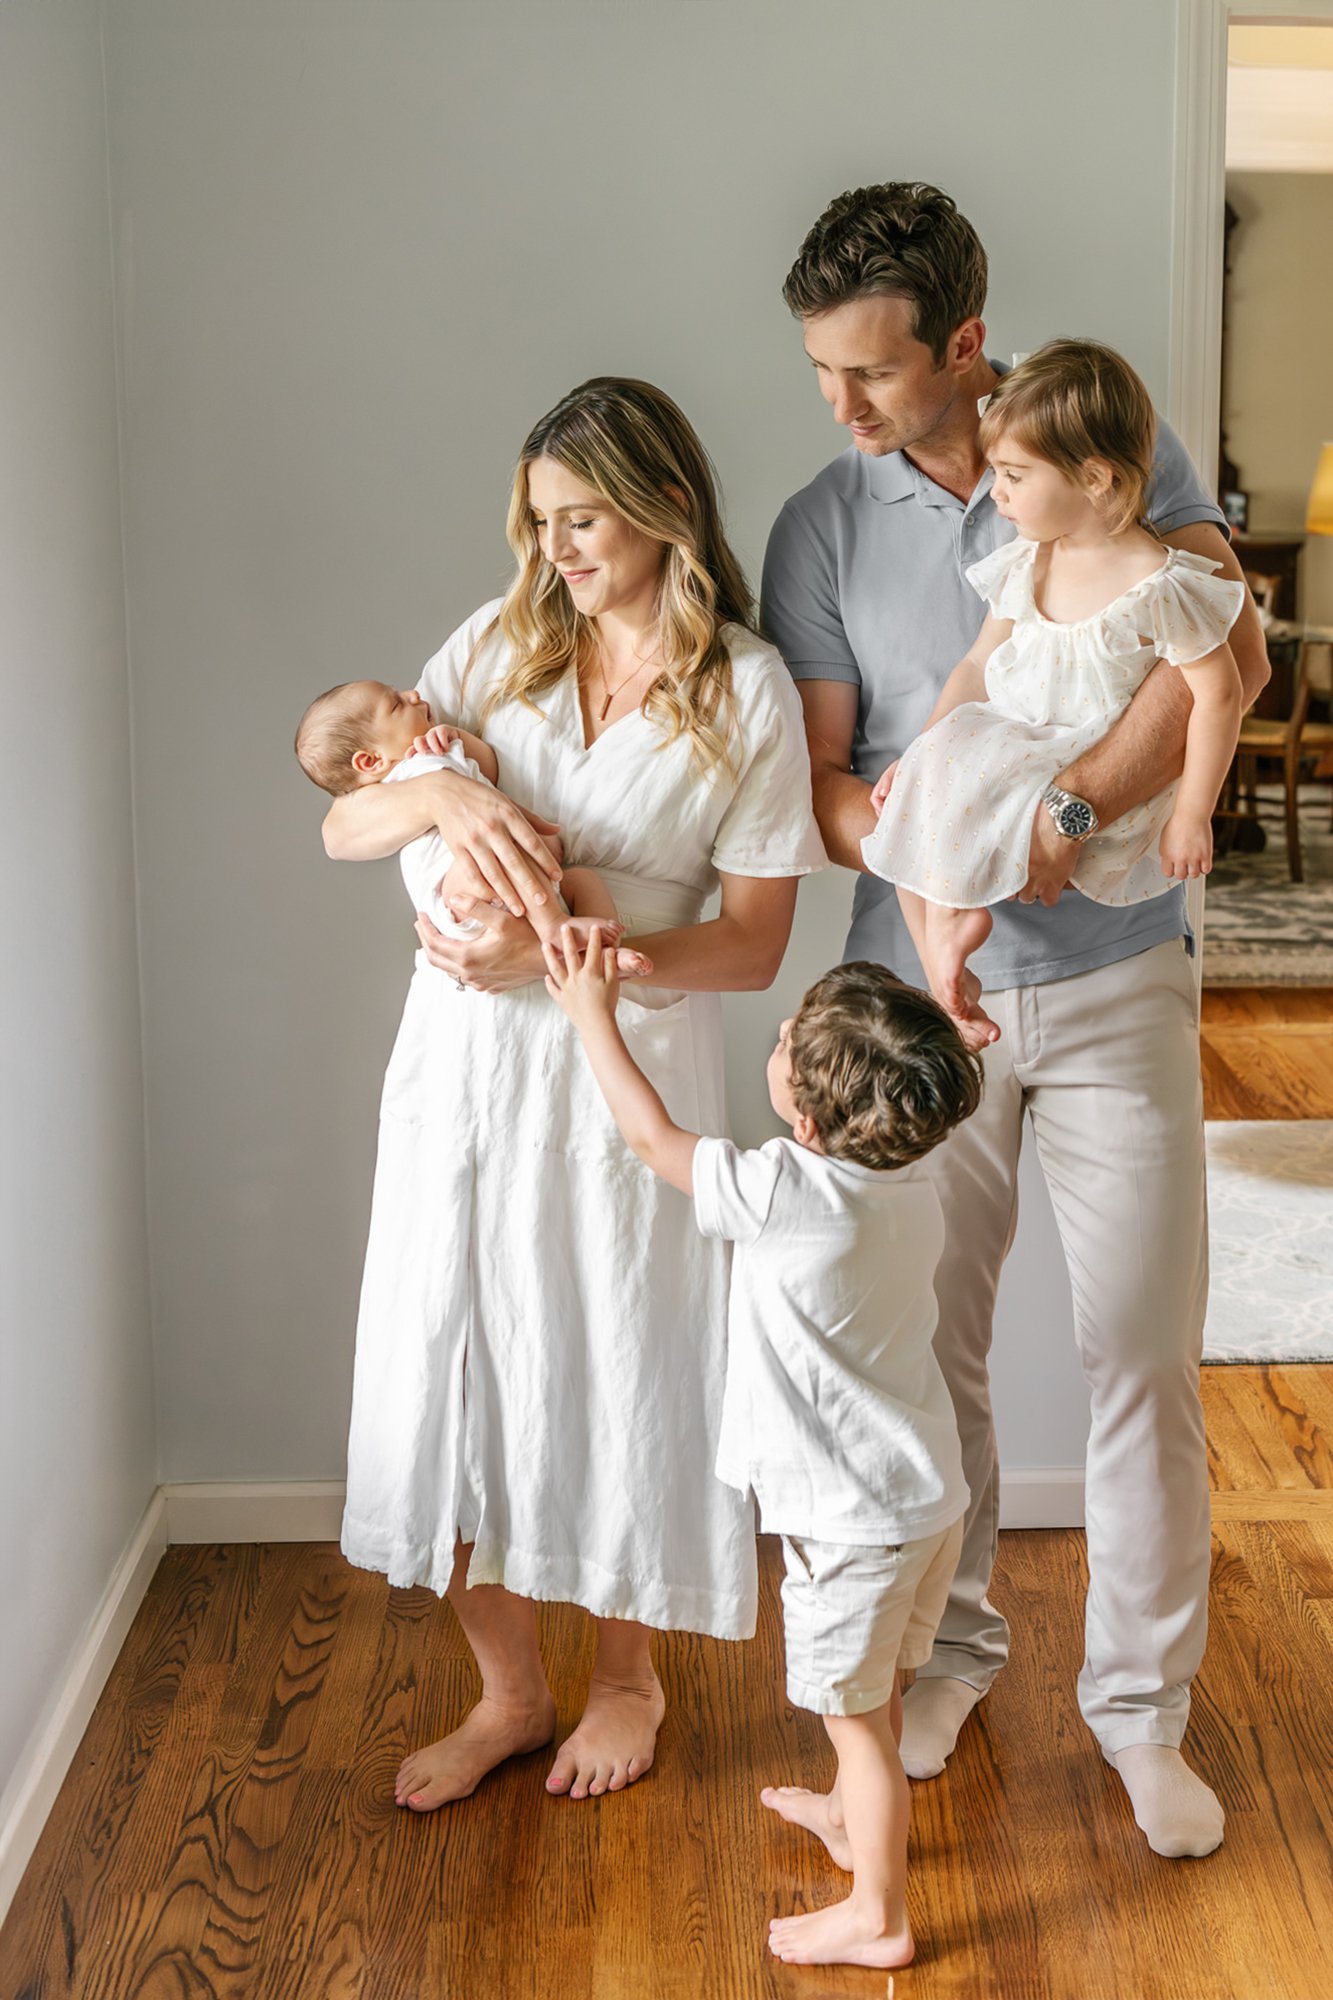   Casual at home newborn photoshoot with mom, dad and two siblings. Family photo pose ideas with newborn casual family photoshoot ideas #UnionCountyFamilyPhotographer #MorrisCountyFamilyPhotographer #NorthernNewJerseyFamilyPhotographer #NorthernNewJe